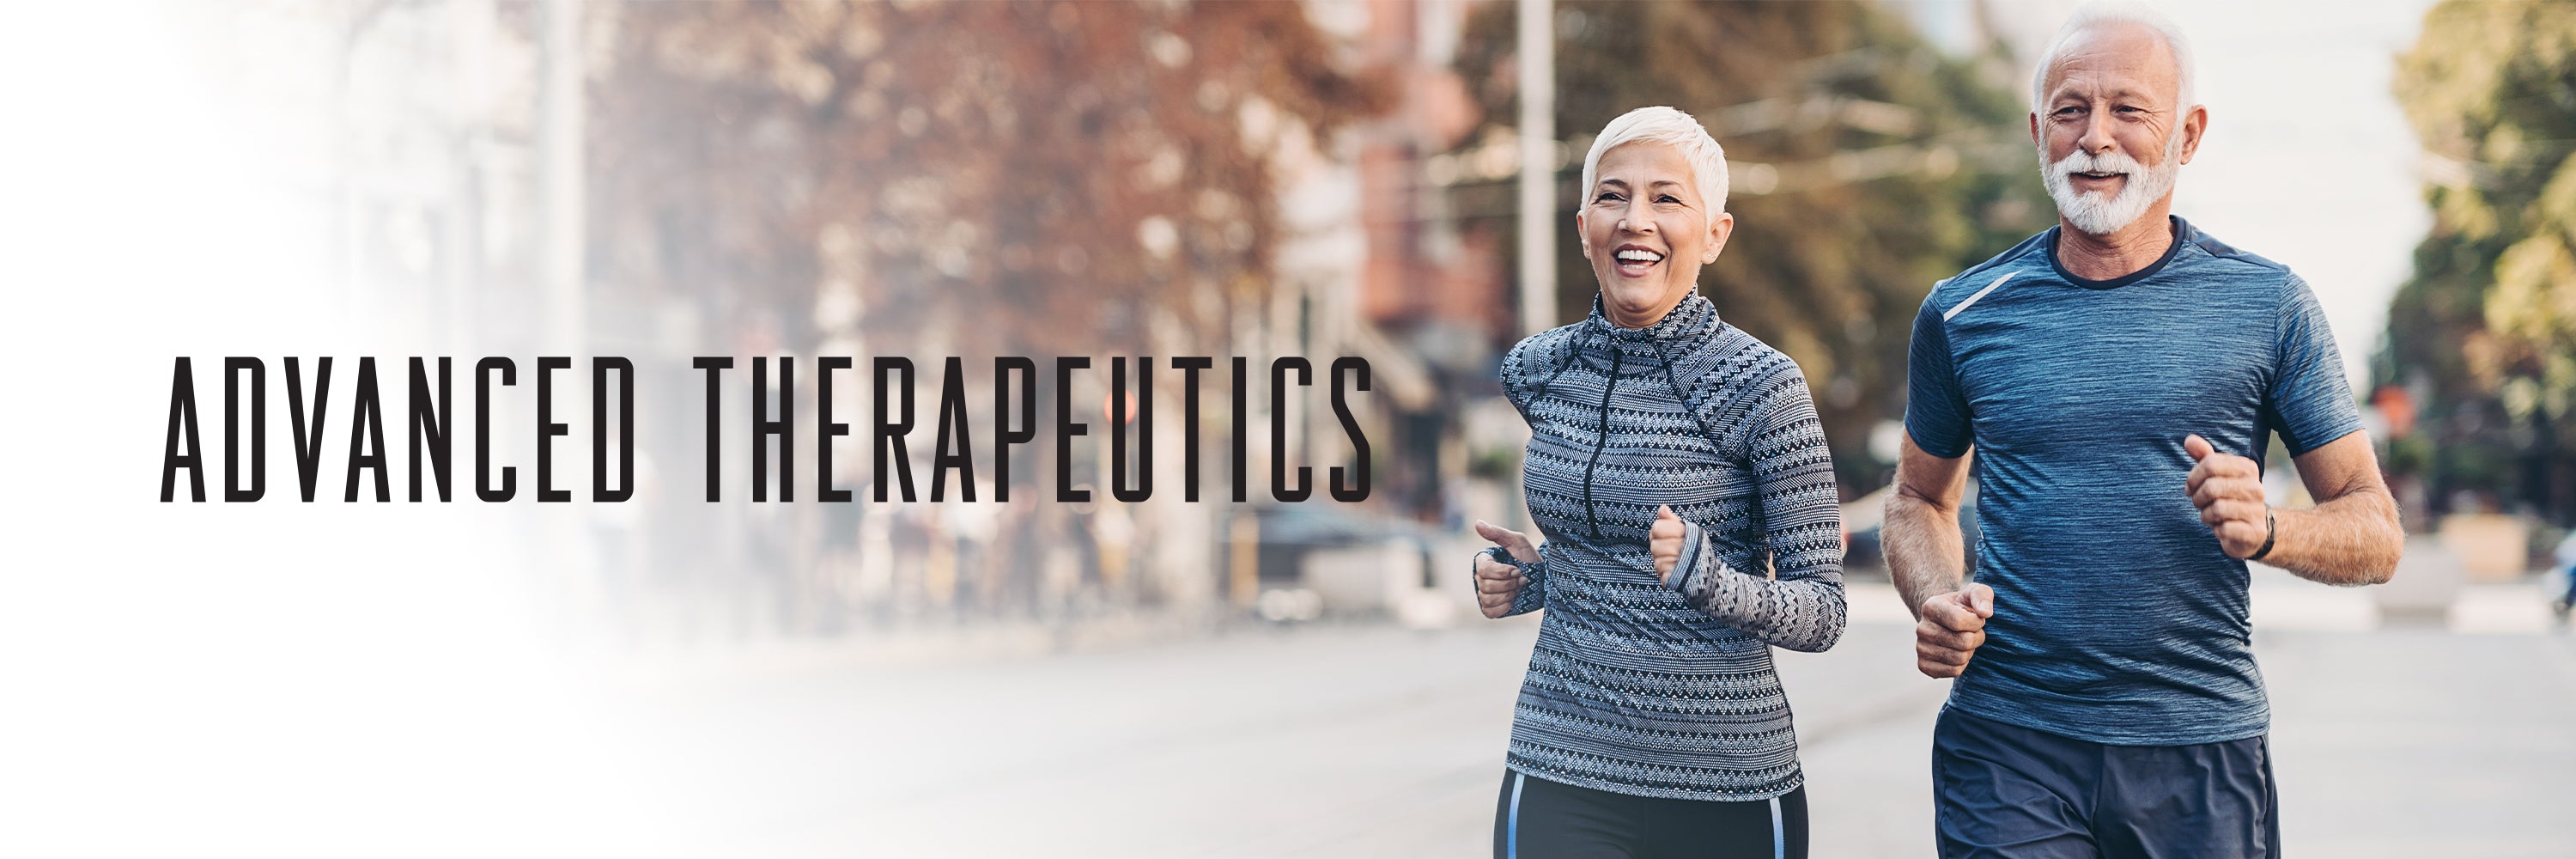 Rx Advanced Therapeutics collection image banner